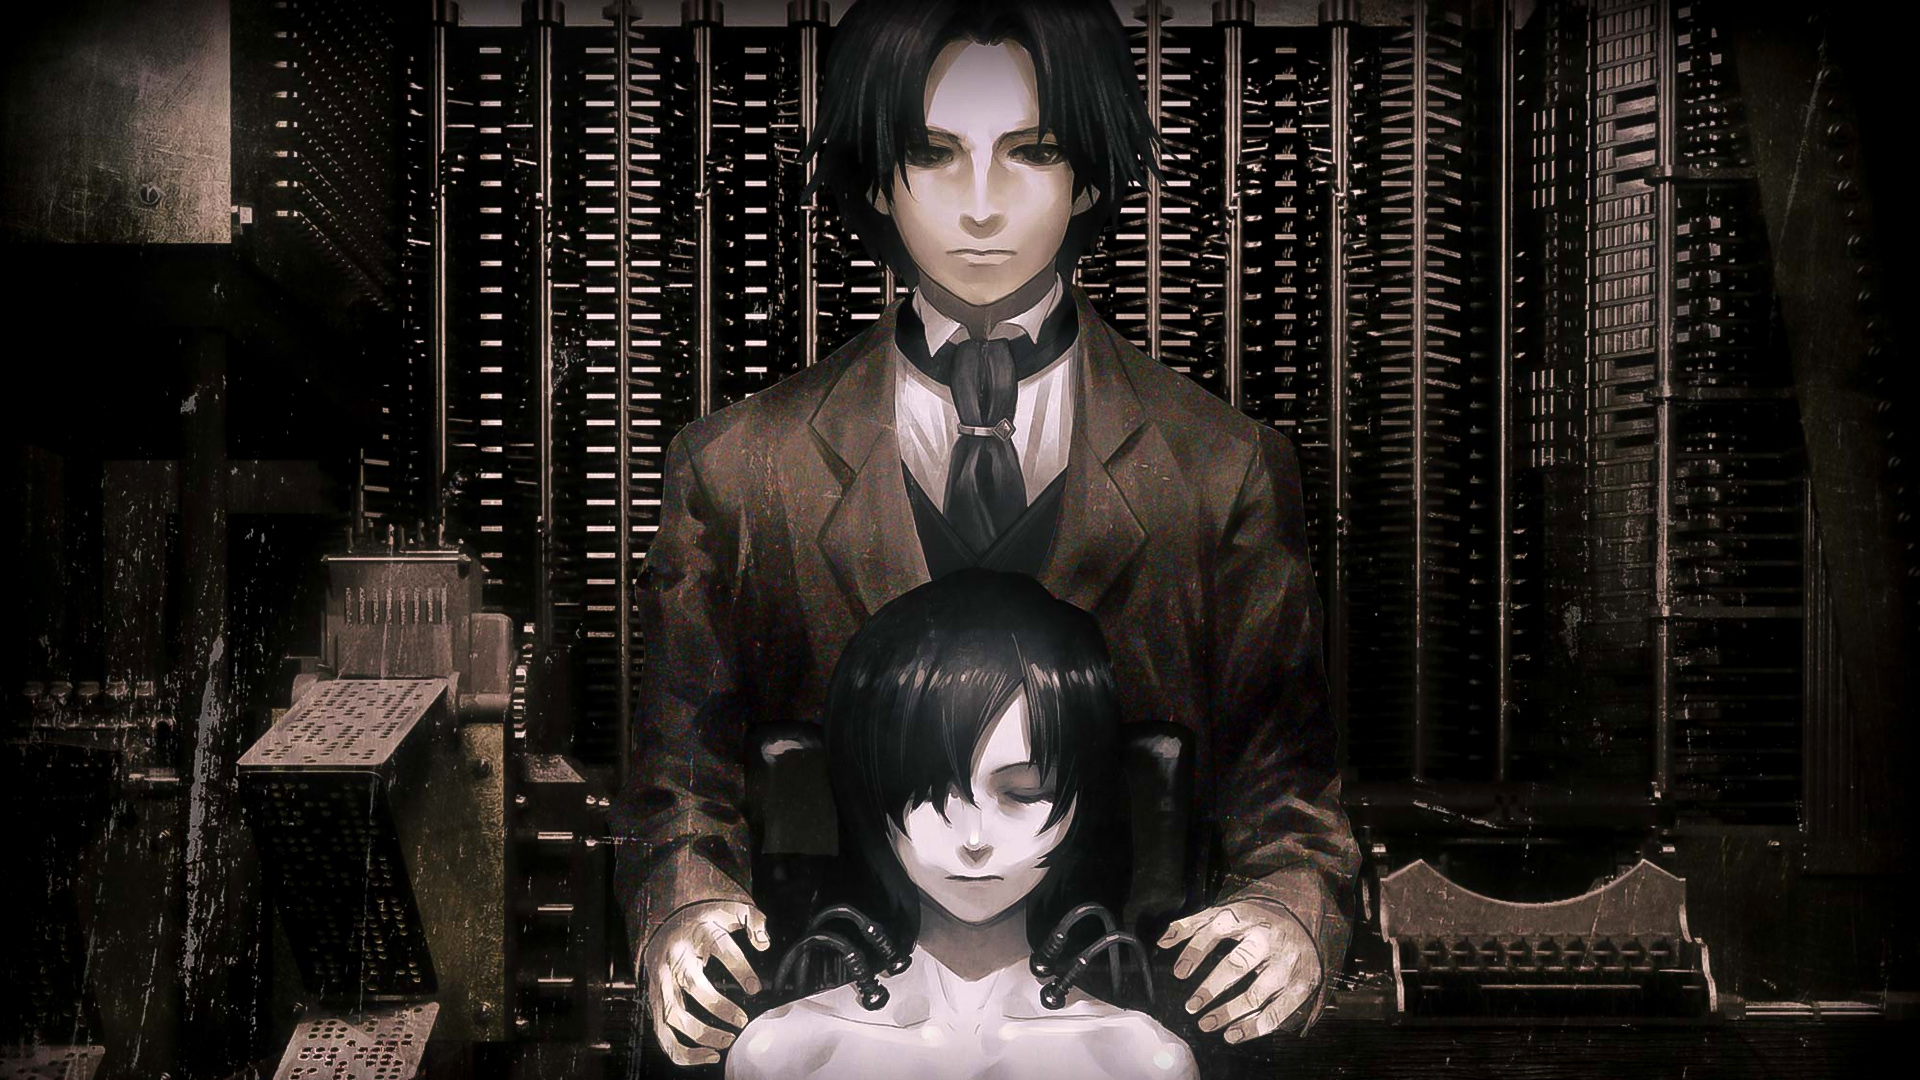 Anime The Empire of Corpses HD Wallpaper | Background Image